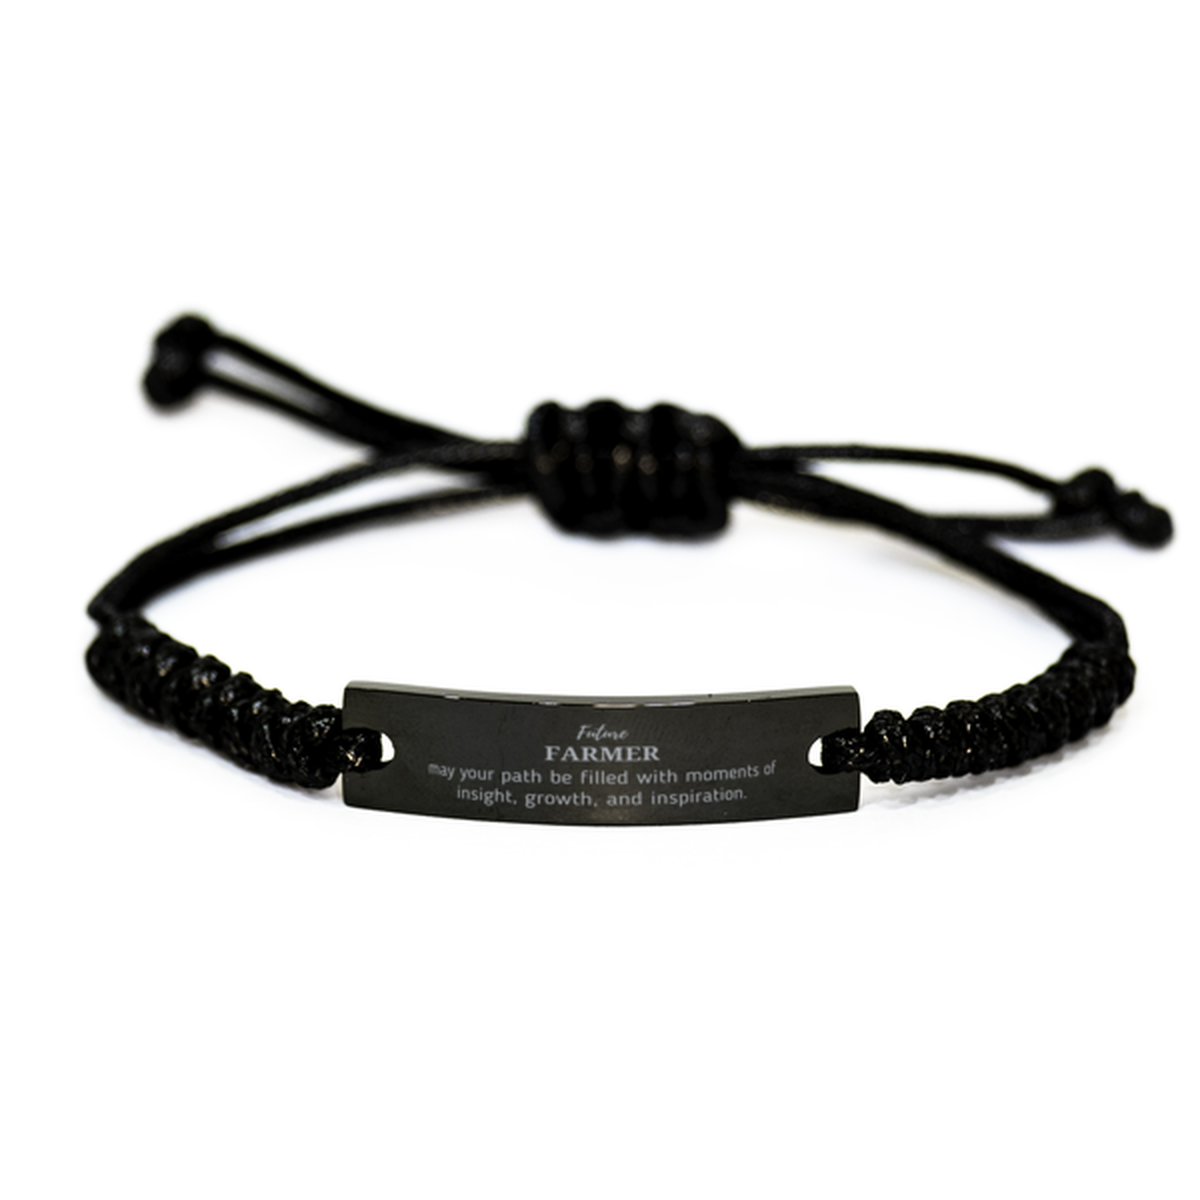 Future Farmer Gifts, May your path be filled with moments of insight, Graduation Gifts for New Farmer, Christmas Unique Black Rope Bracelet For Men, Women, Friends